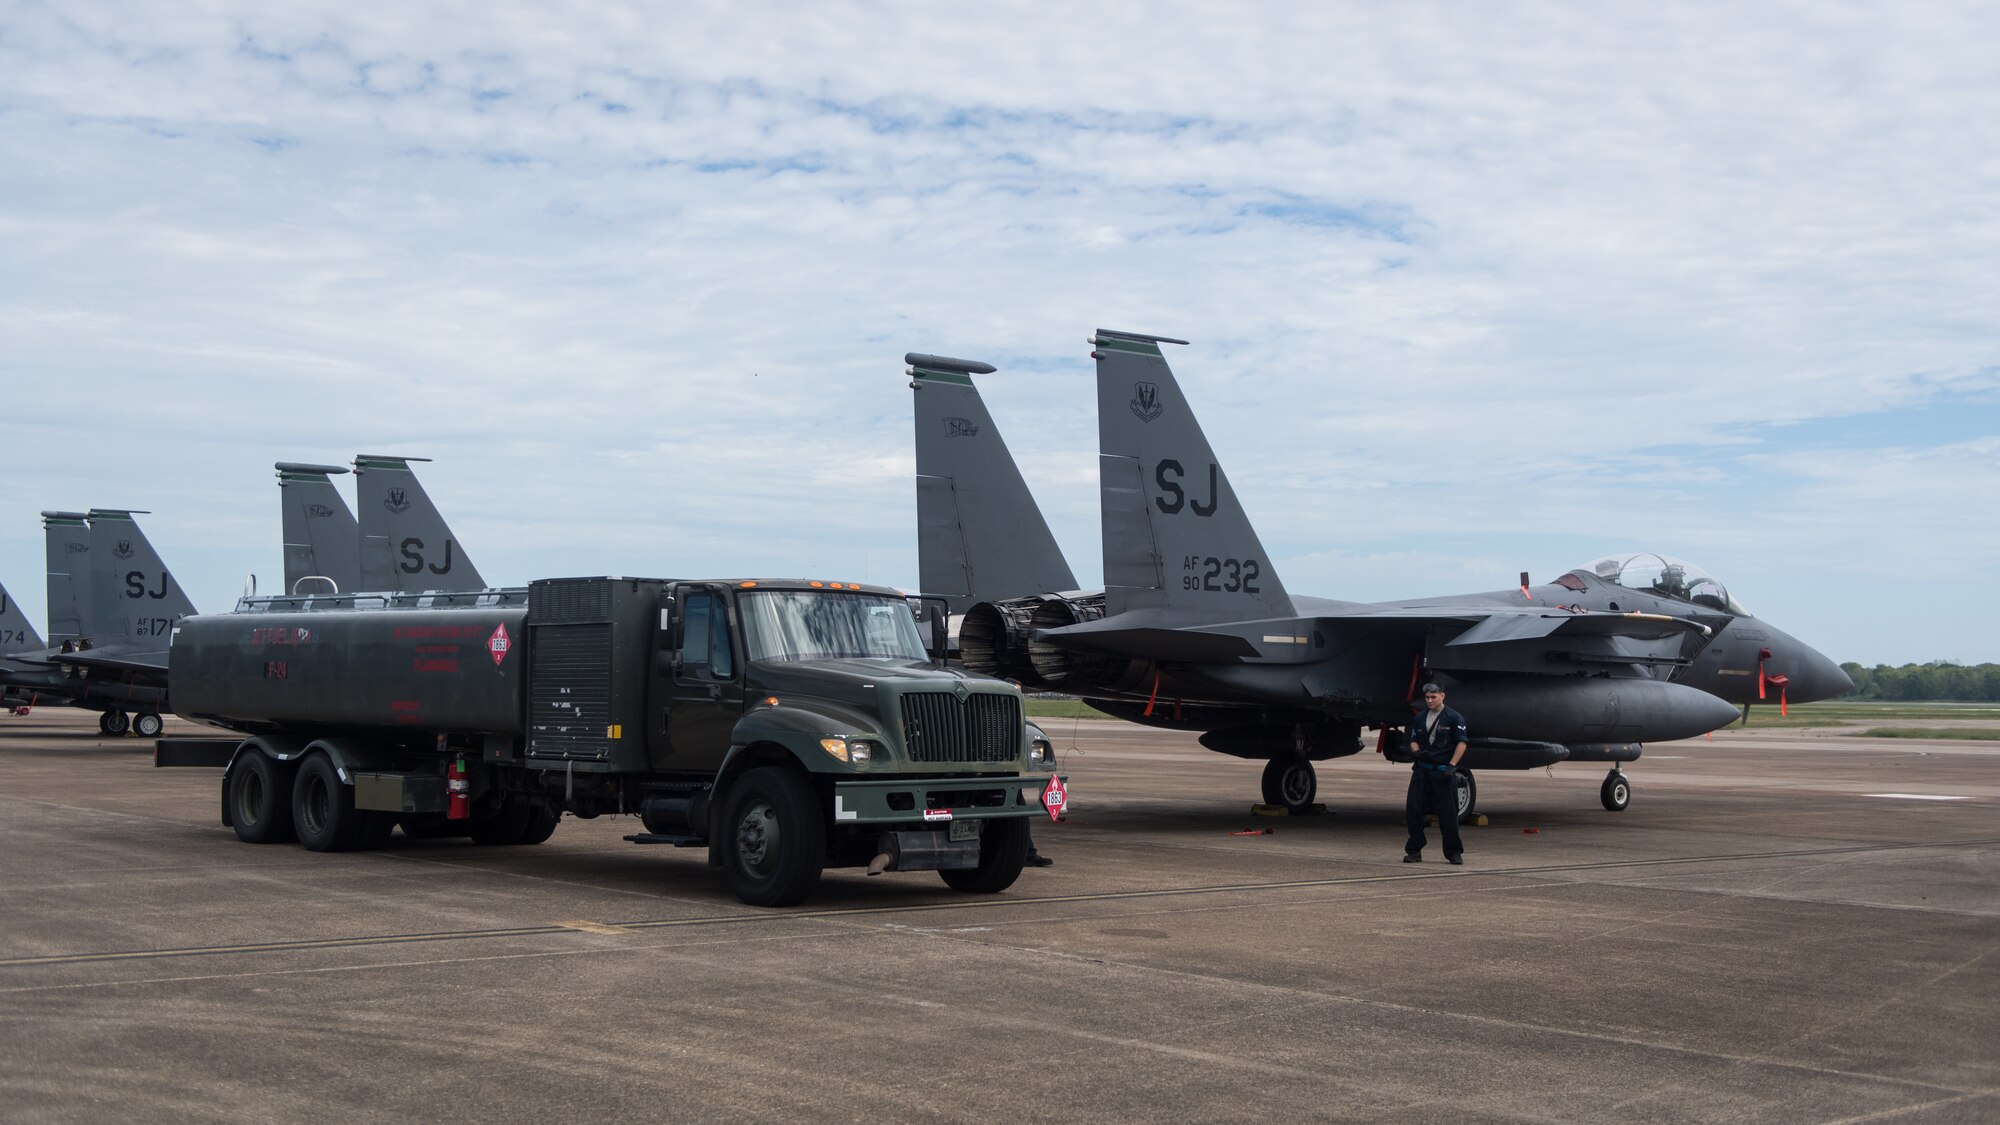 Airmen from the 2nd Logistic Readiness Squadron petroleum, oils and lubricants distribution flight prepare to fuel F-15E Strike Eagles from Seymour Johnson Air Force Base, North Carolina at Barksdale Air Force Base, La., Sept. 12, 2018. The aircraft evacuated to Barksdale to avoid possible damage from Hurricane Florence